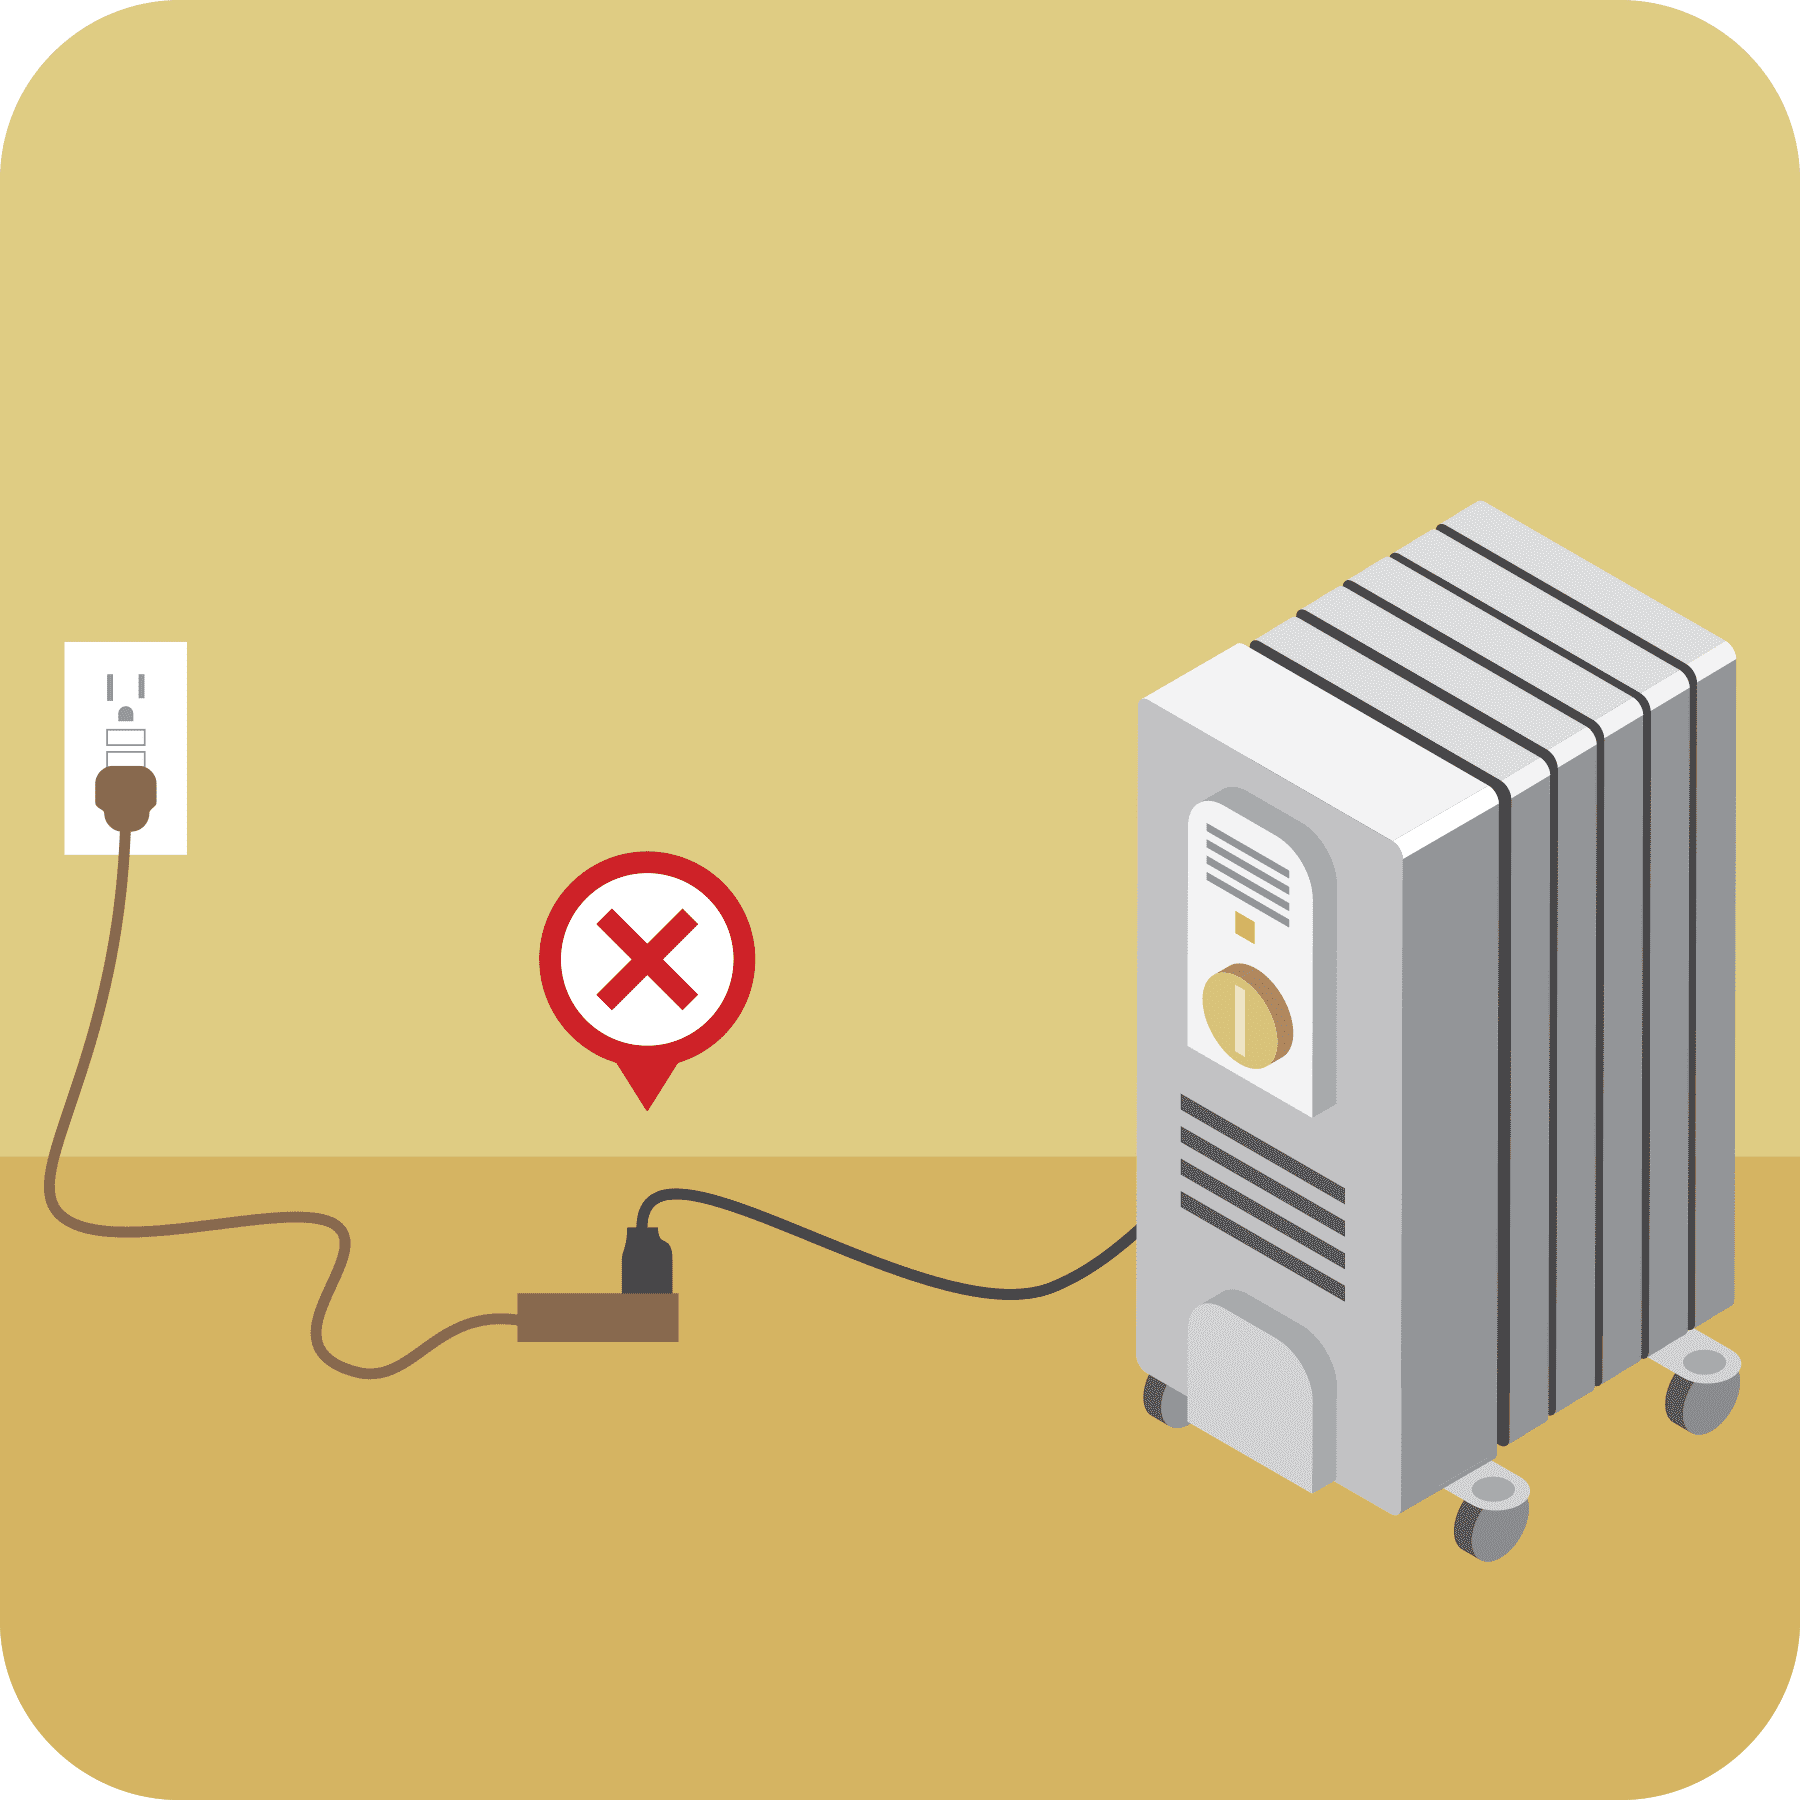 don't use extension cords on appliances